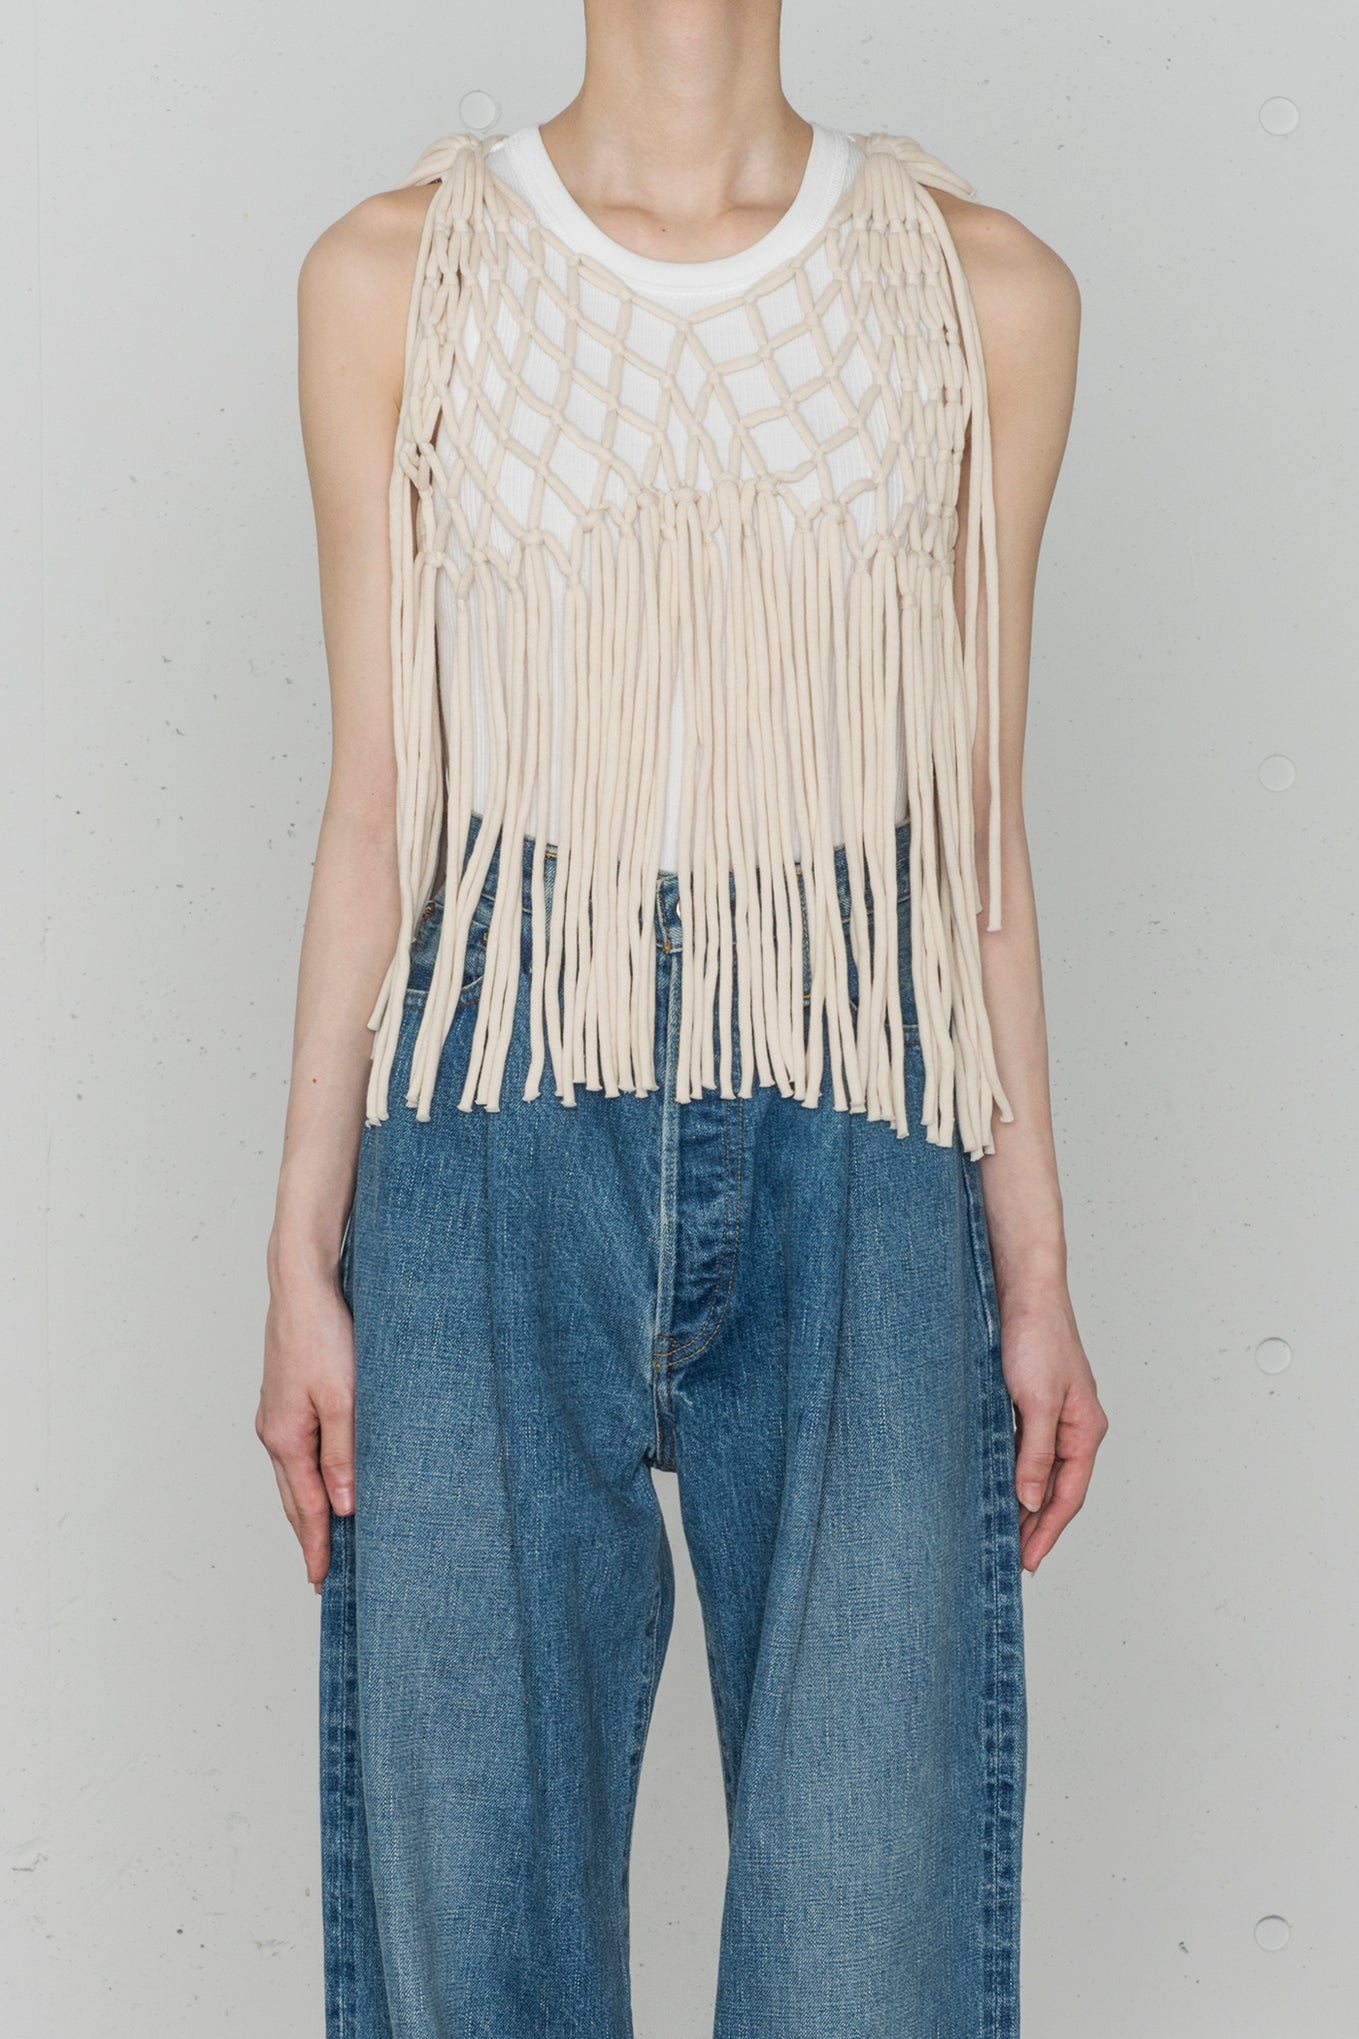 ROPE NET CROPPED TOP